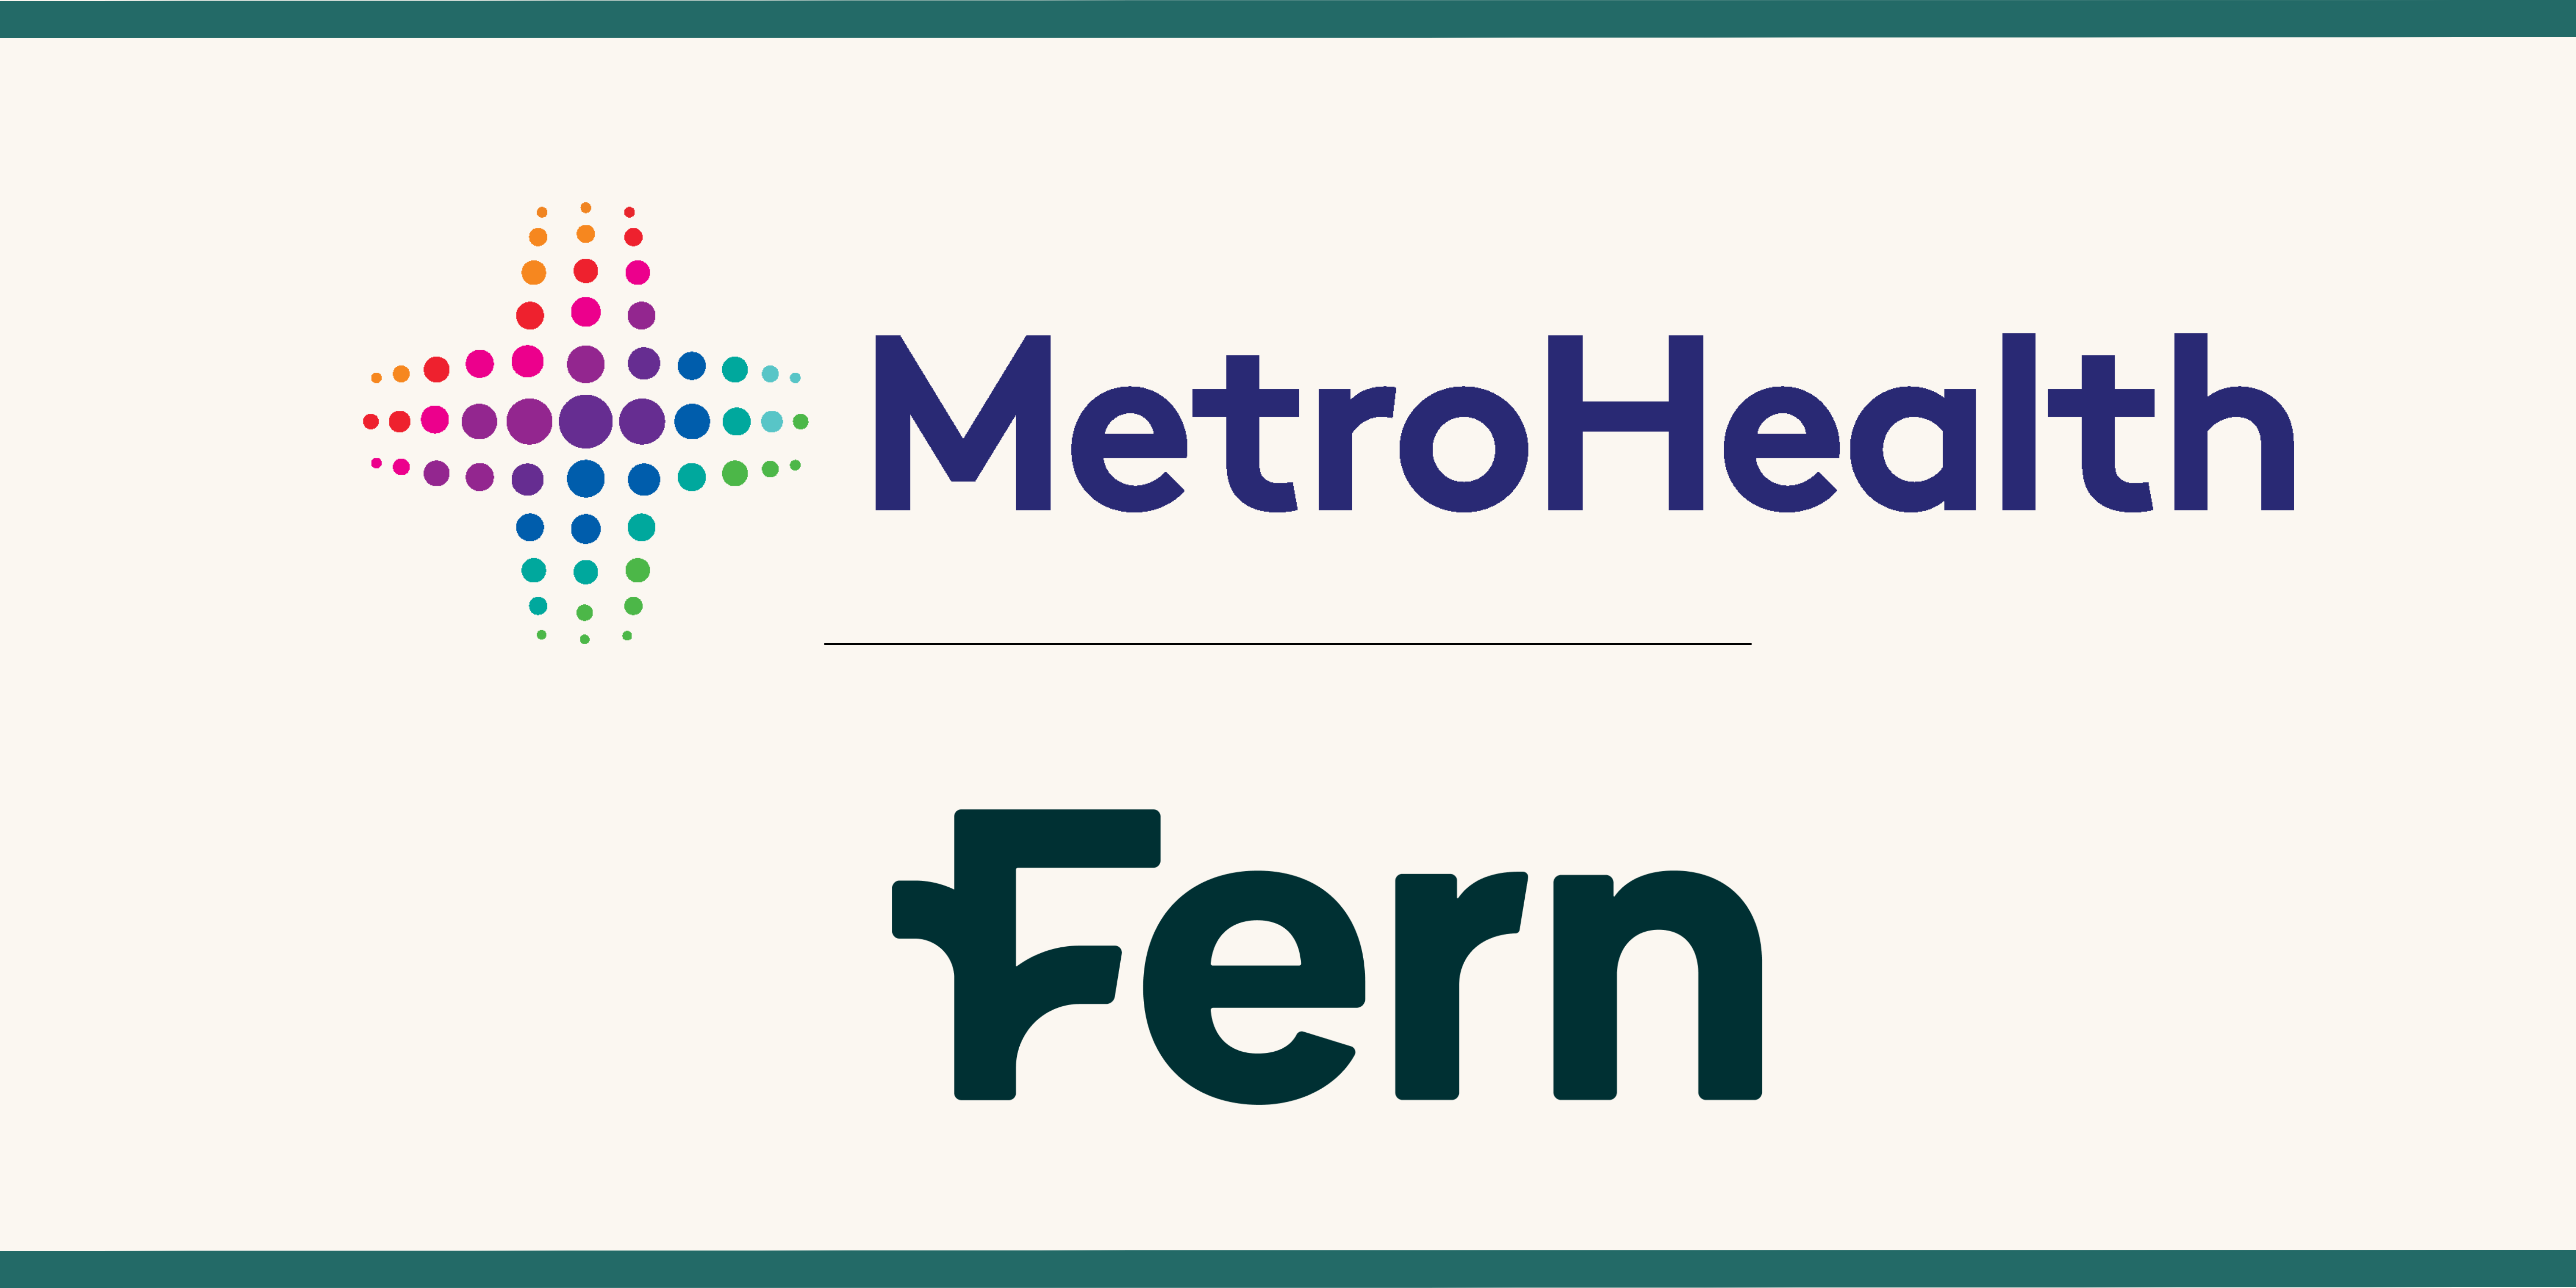 MetroHealth System and Fern Health logos side by side